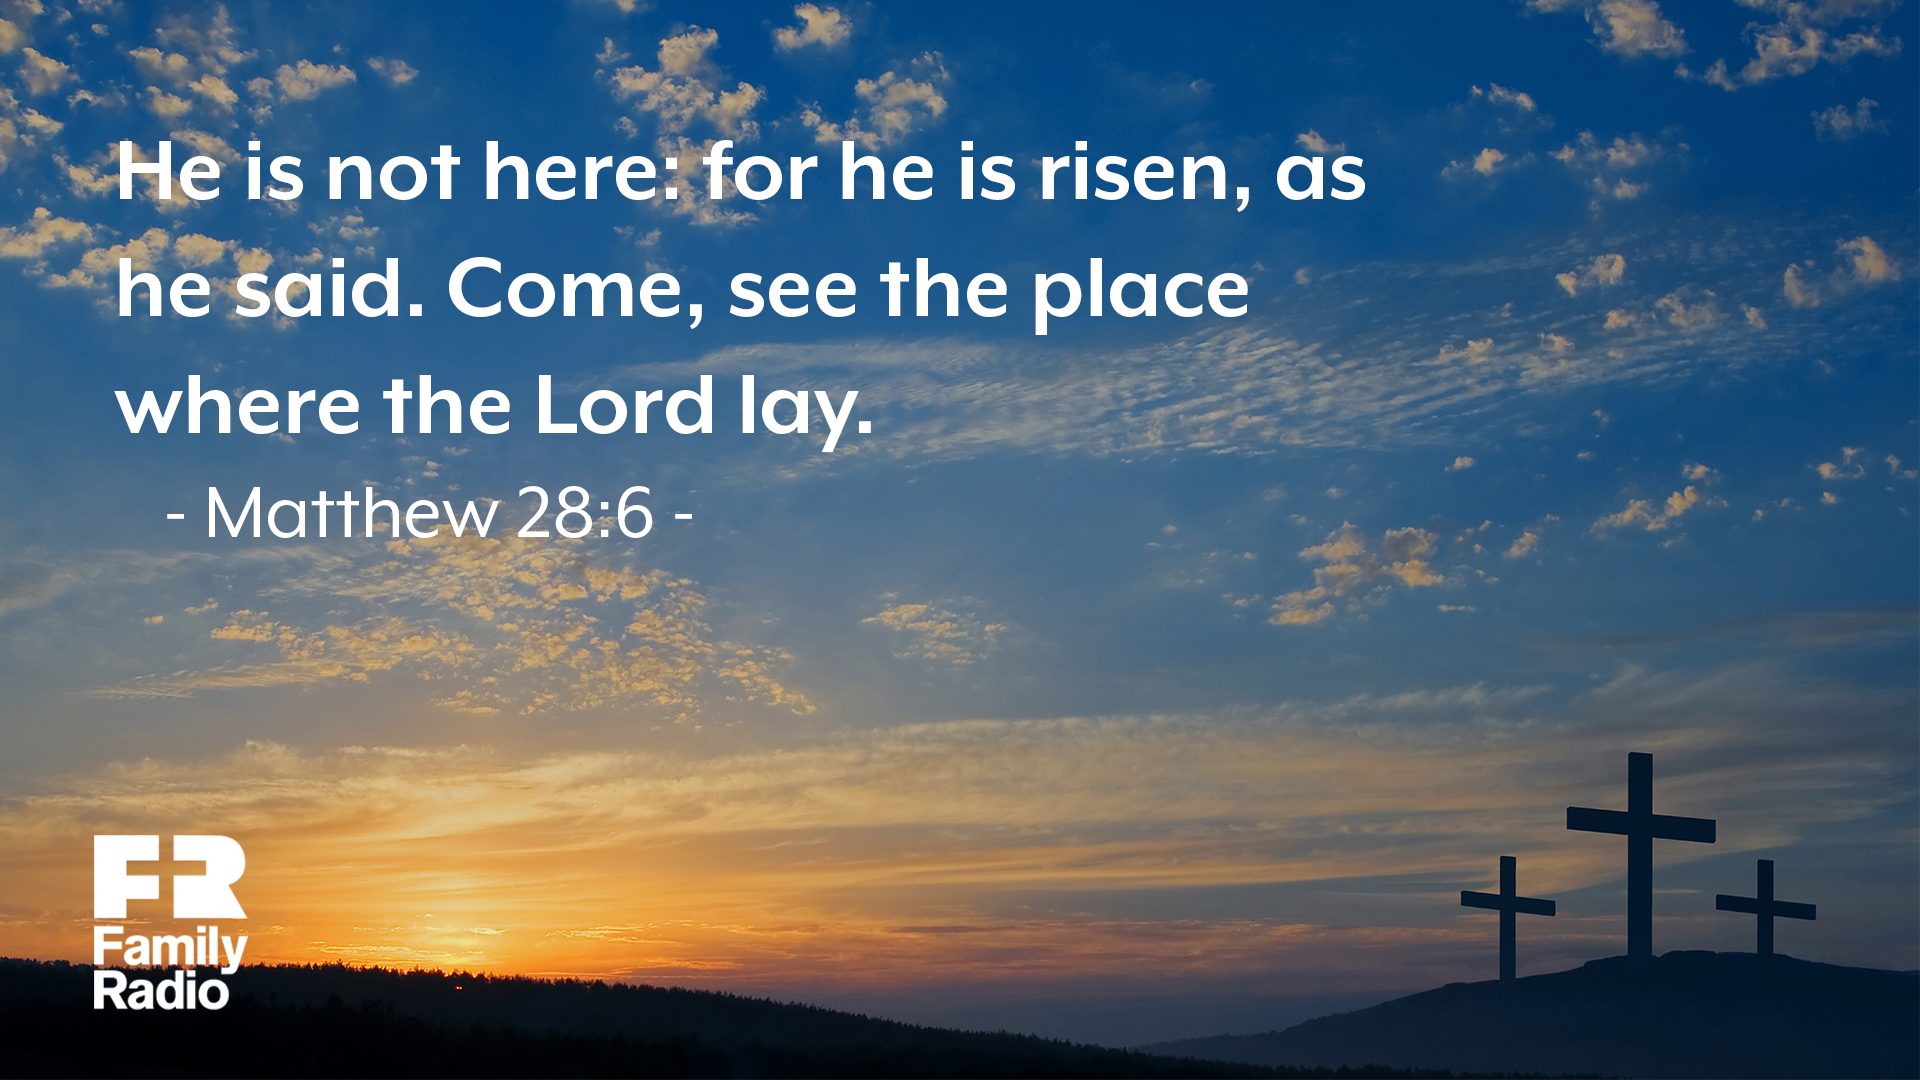 "He is not here: for he is risen, as he said. Come, see the place where the Lord lay."